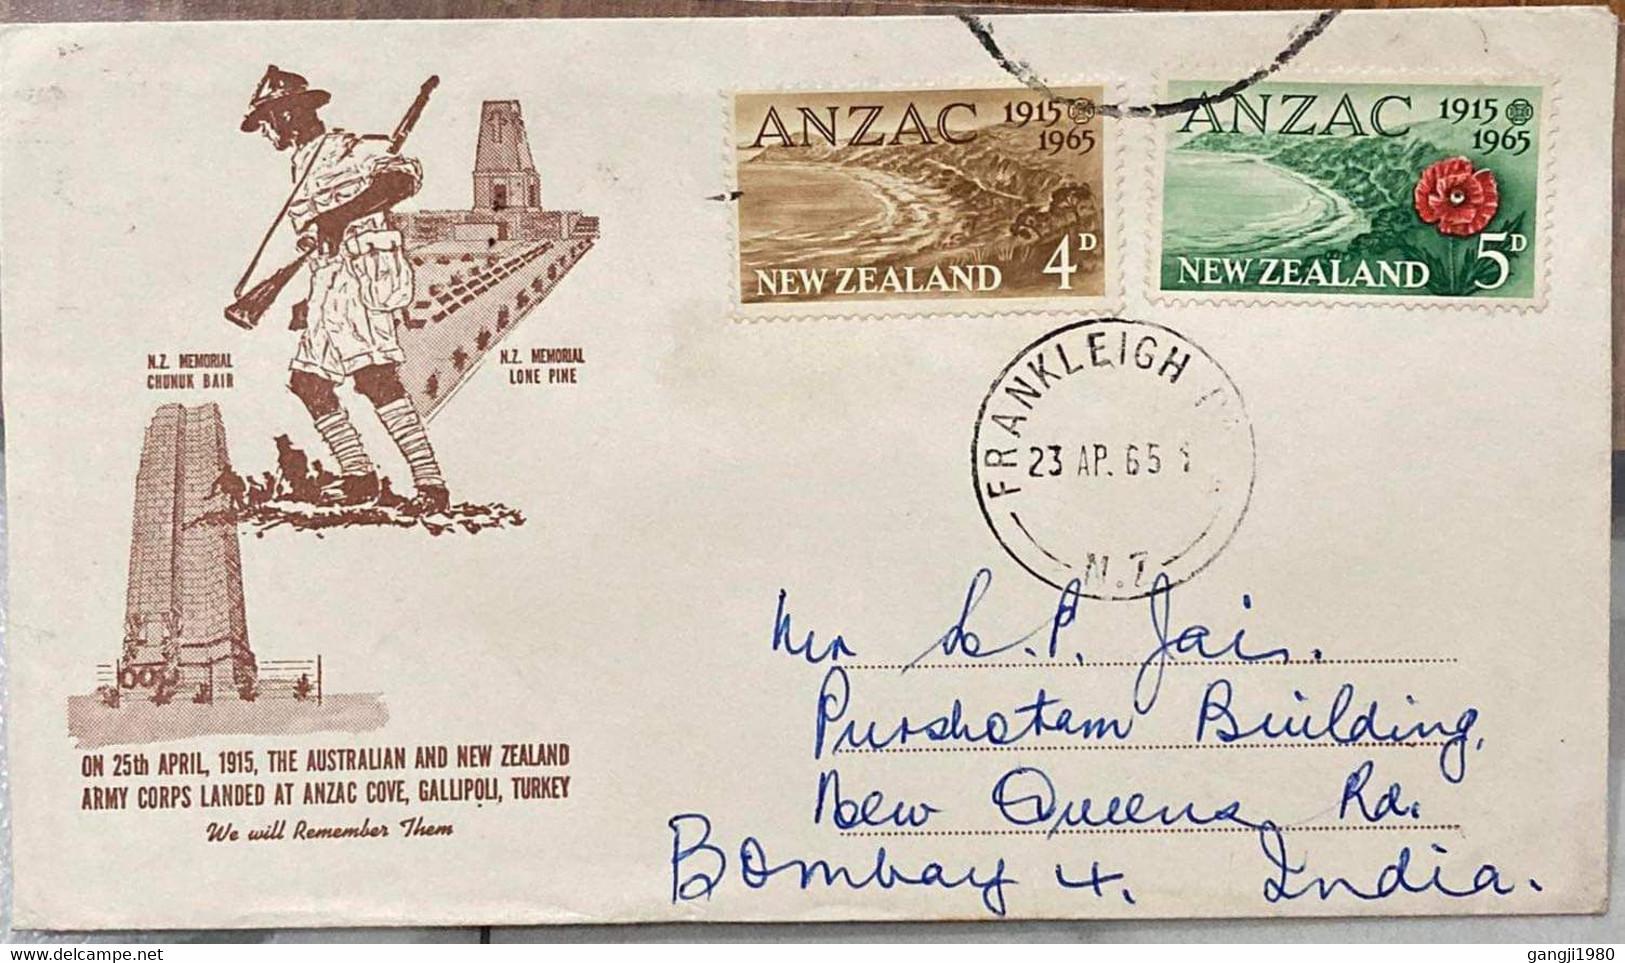 New Zealand,Australia,1965.private Fdc, ANZAC,Frankleigh,POST MARK,TO ,INDIA,TO ADDRESS,L.P.JAI ,Cricketer,cricket, - Covers & Documents